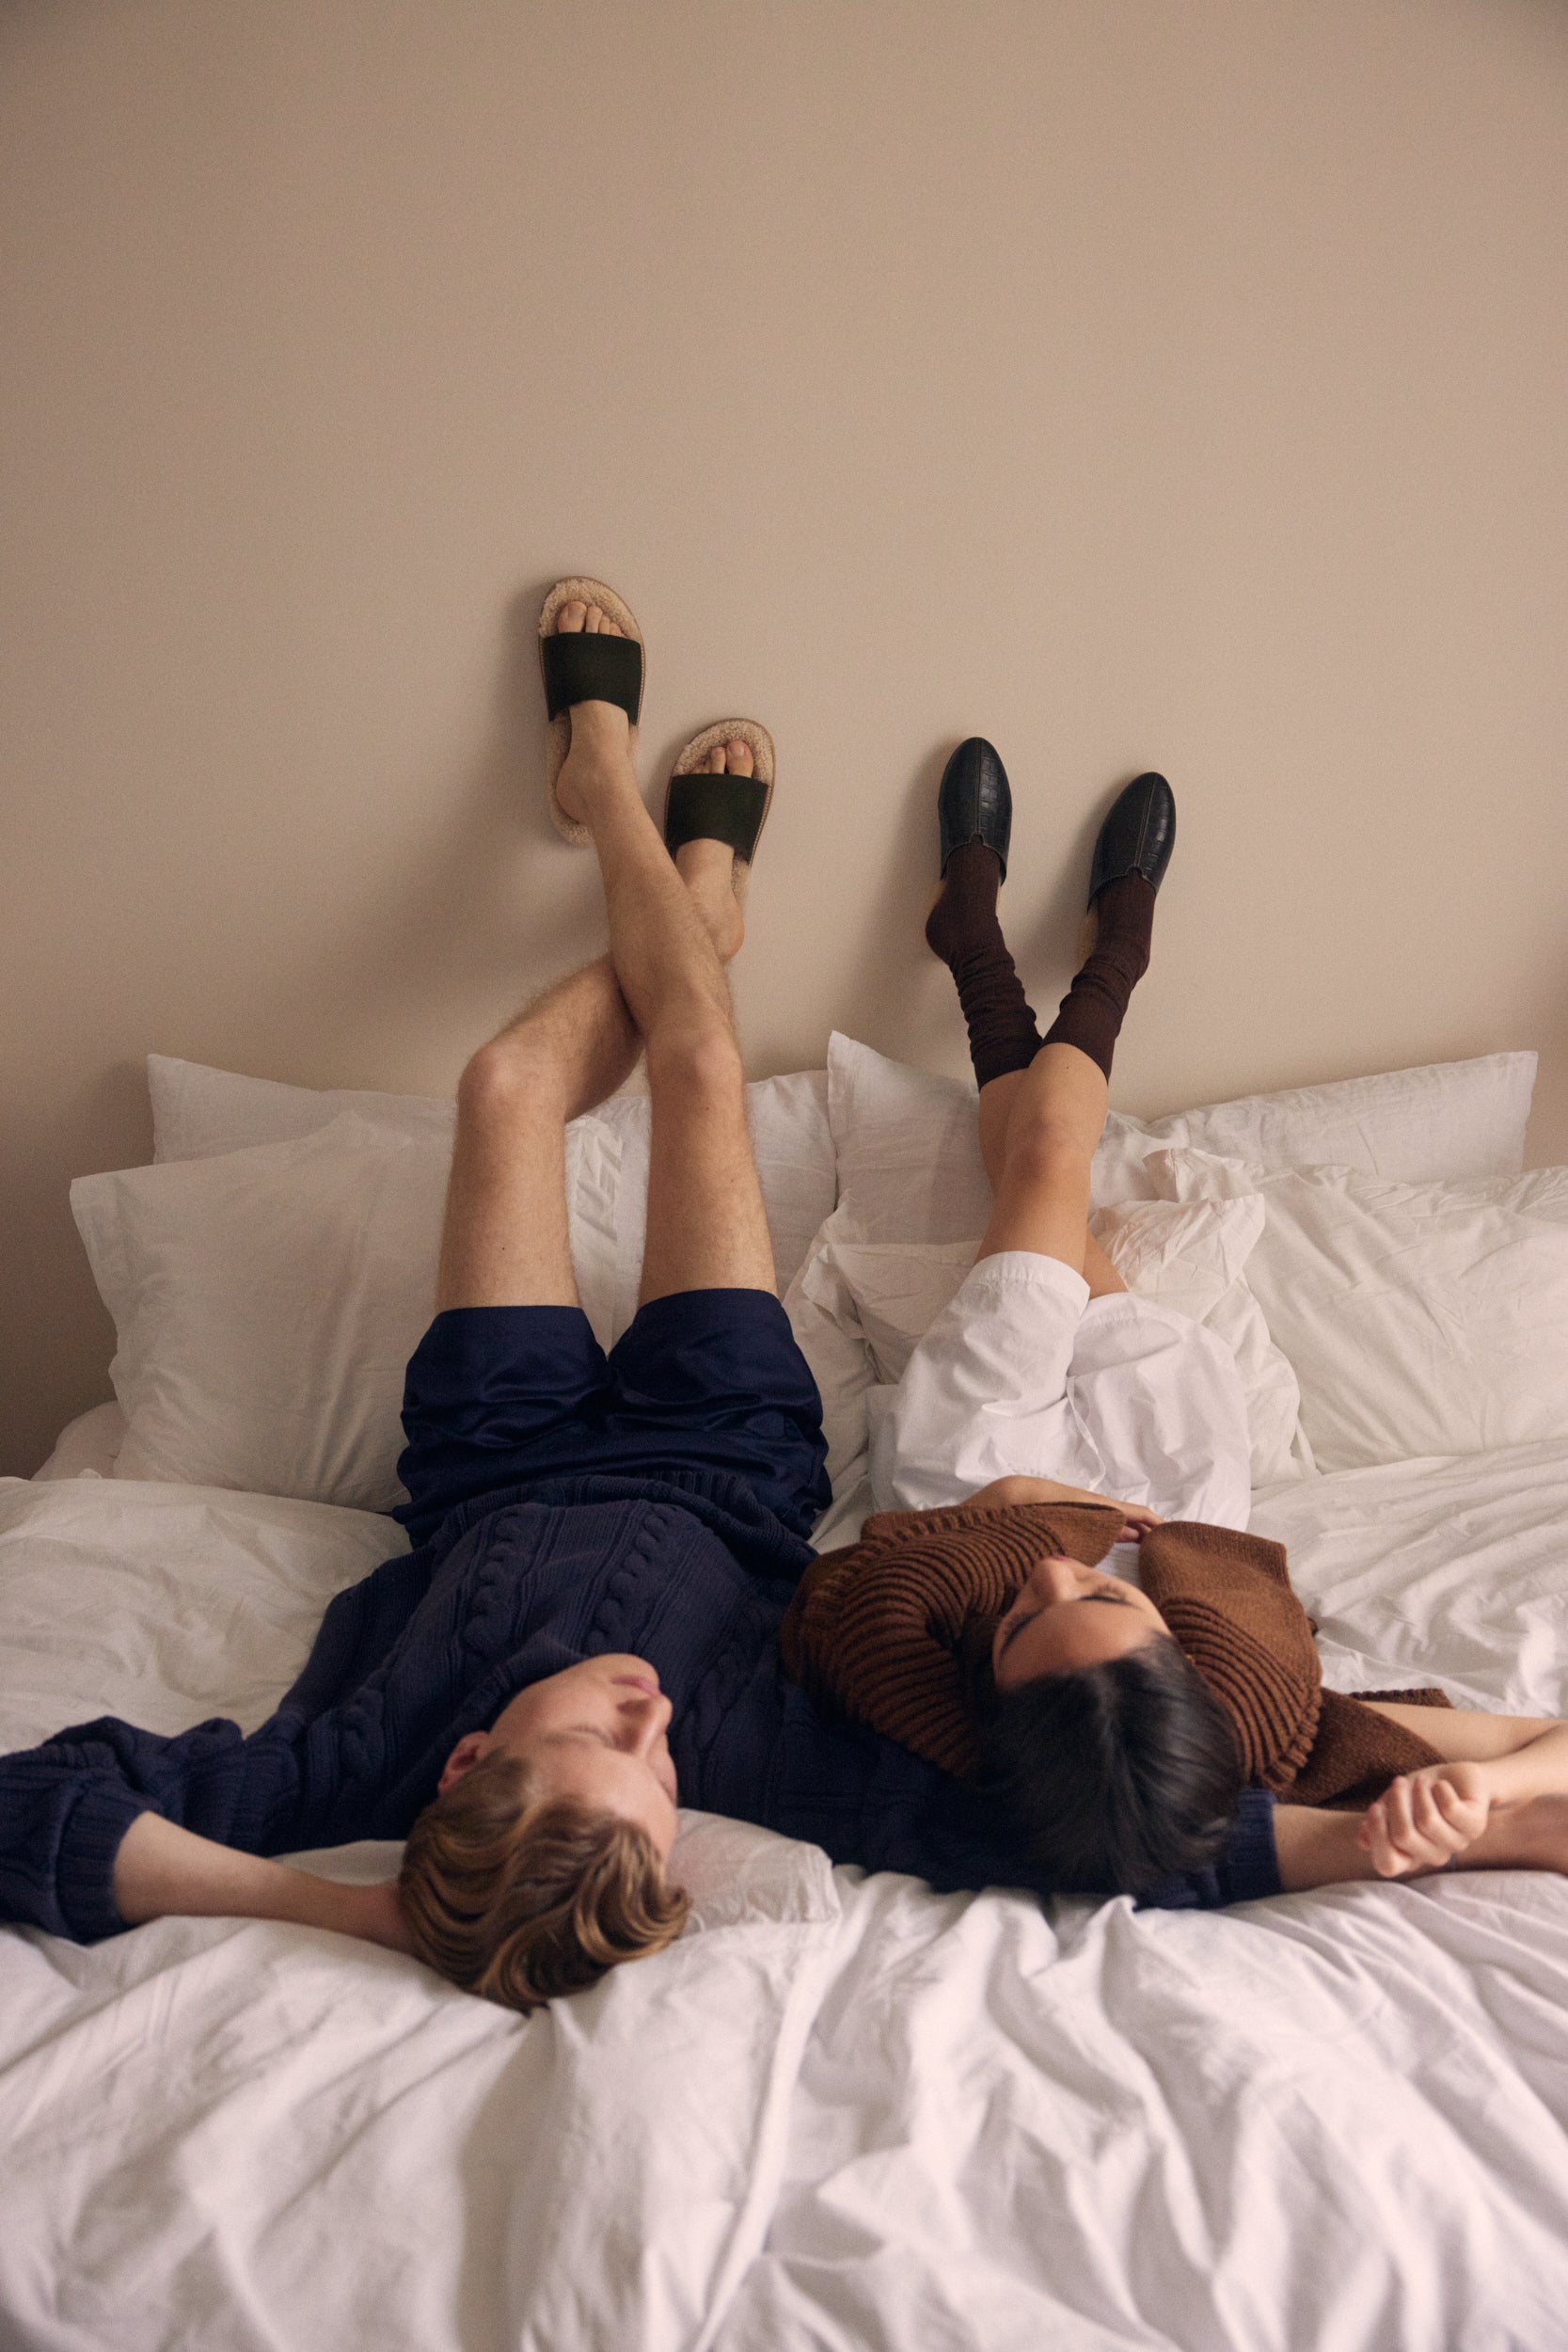 Inabo slippers worn by a man and a women lying in bed with their feet up